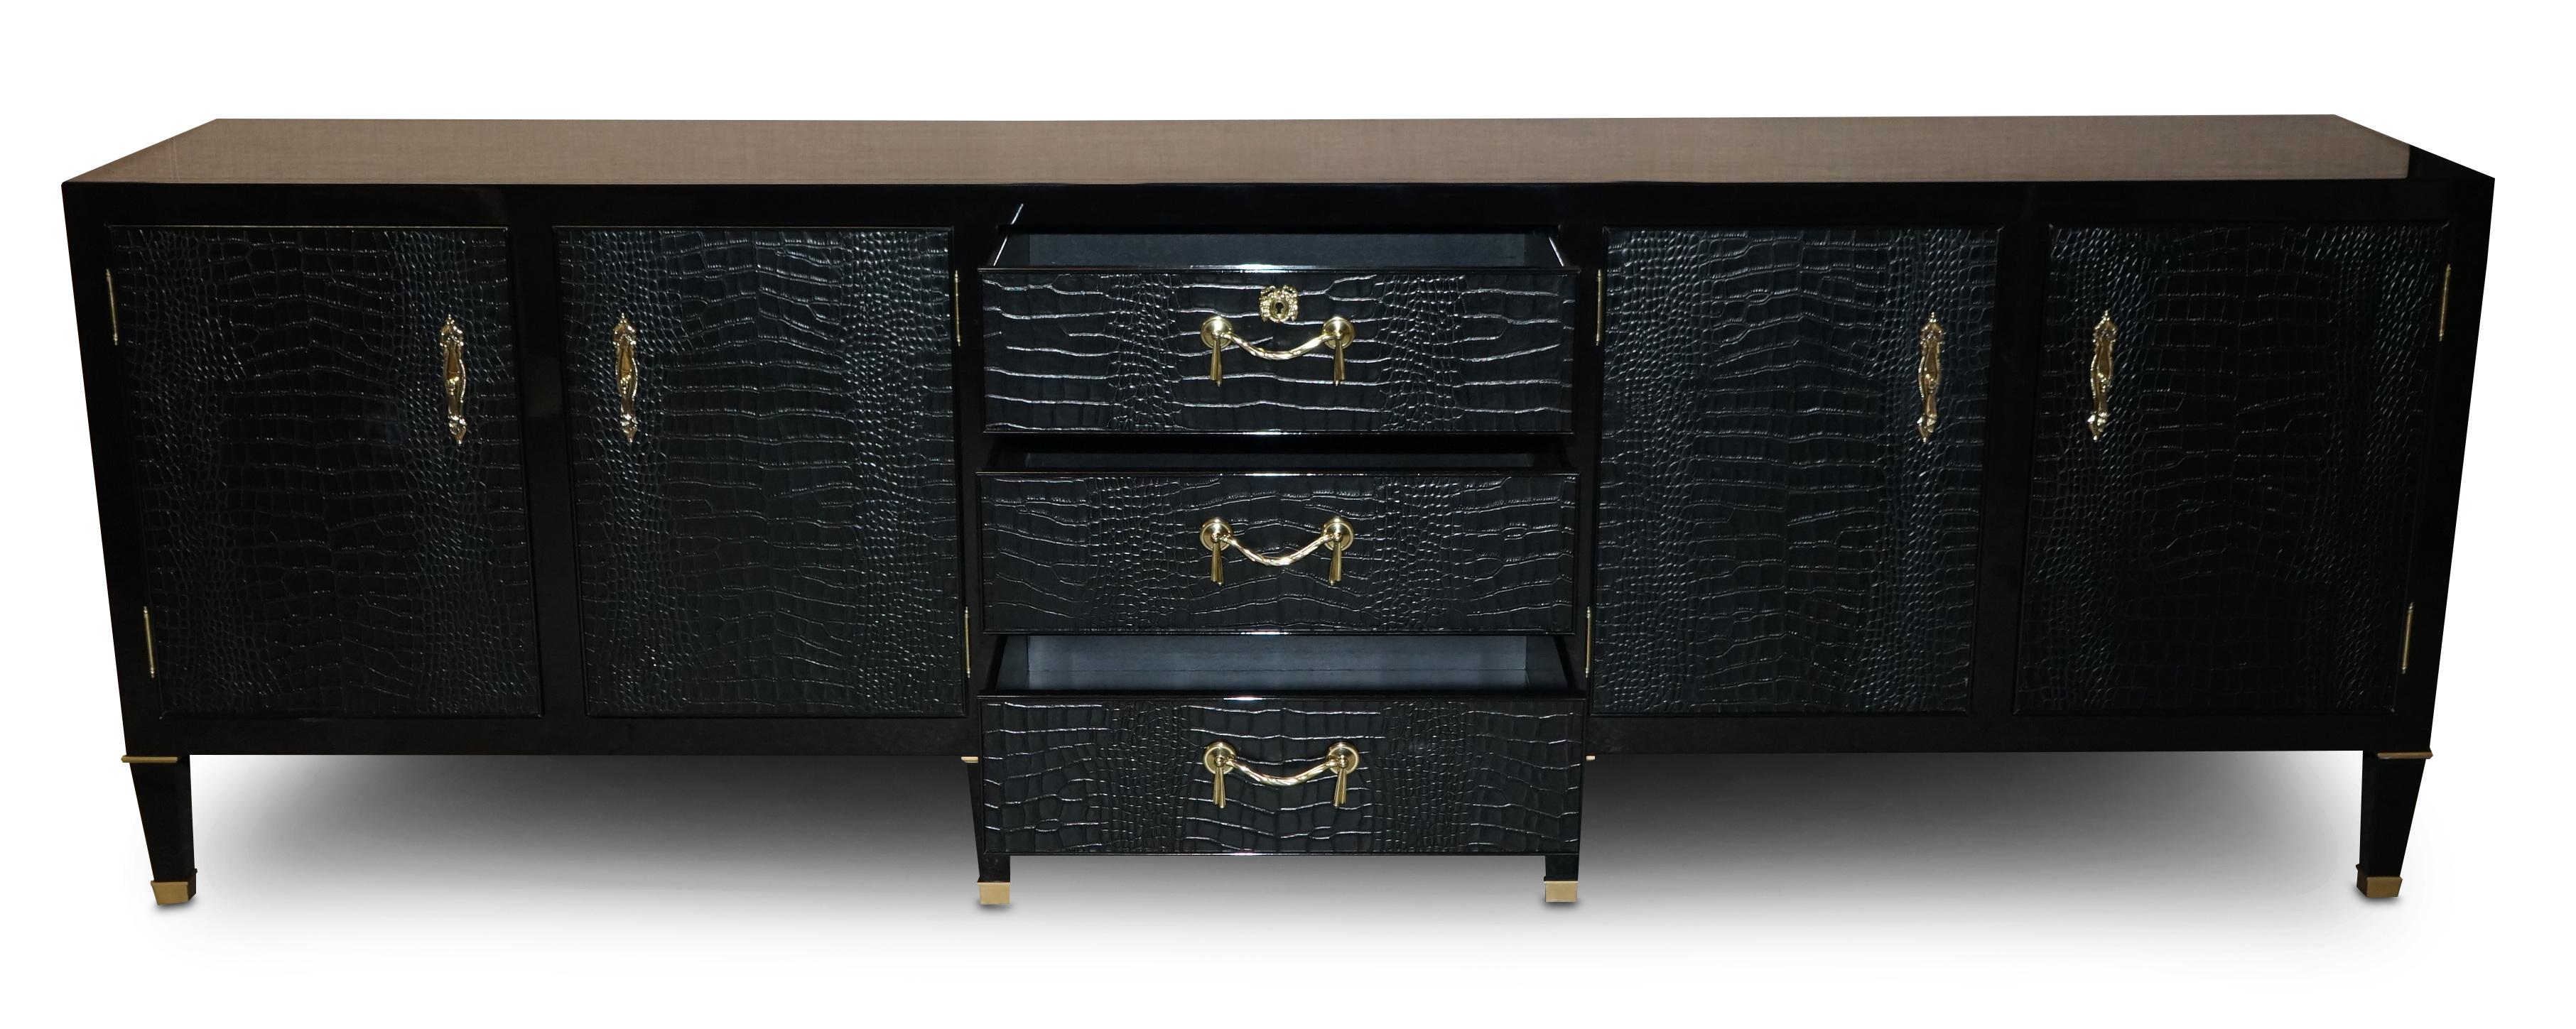 Ralph Lauren Brook Street Chest of Drawers Sideboard Alligator Leather For Sale 9